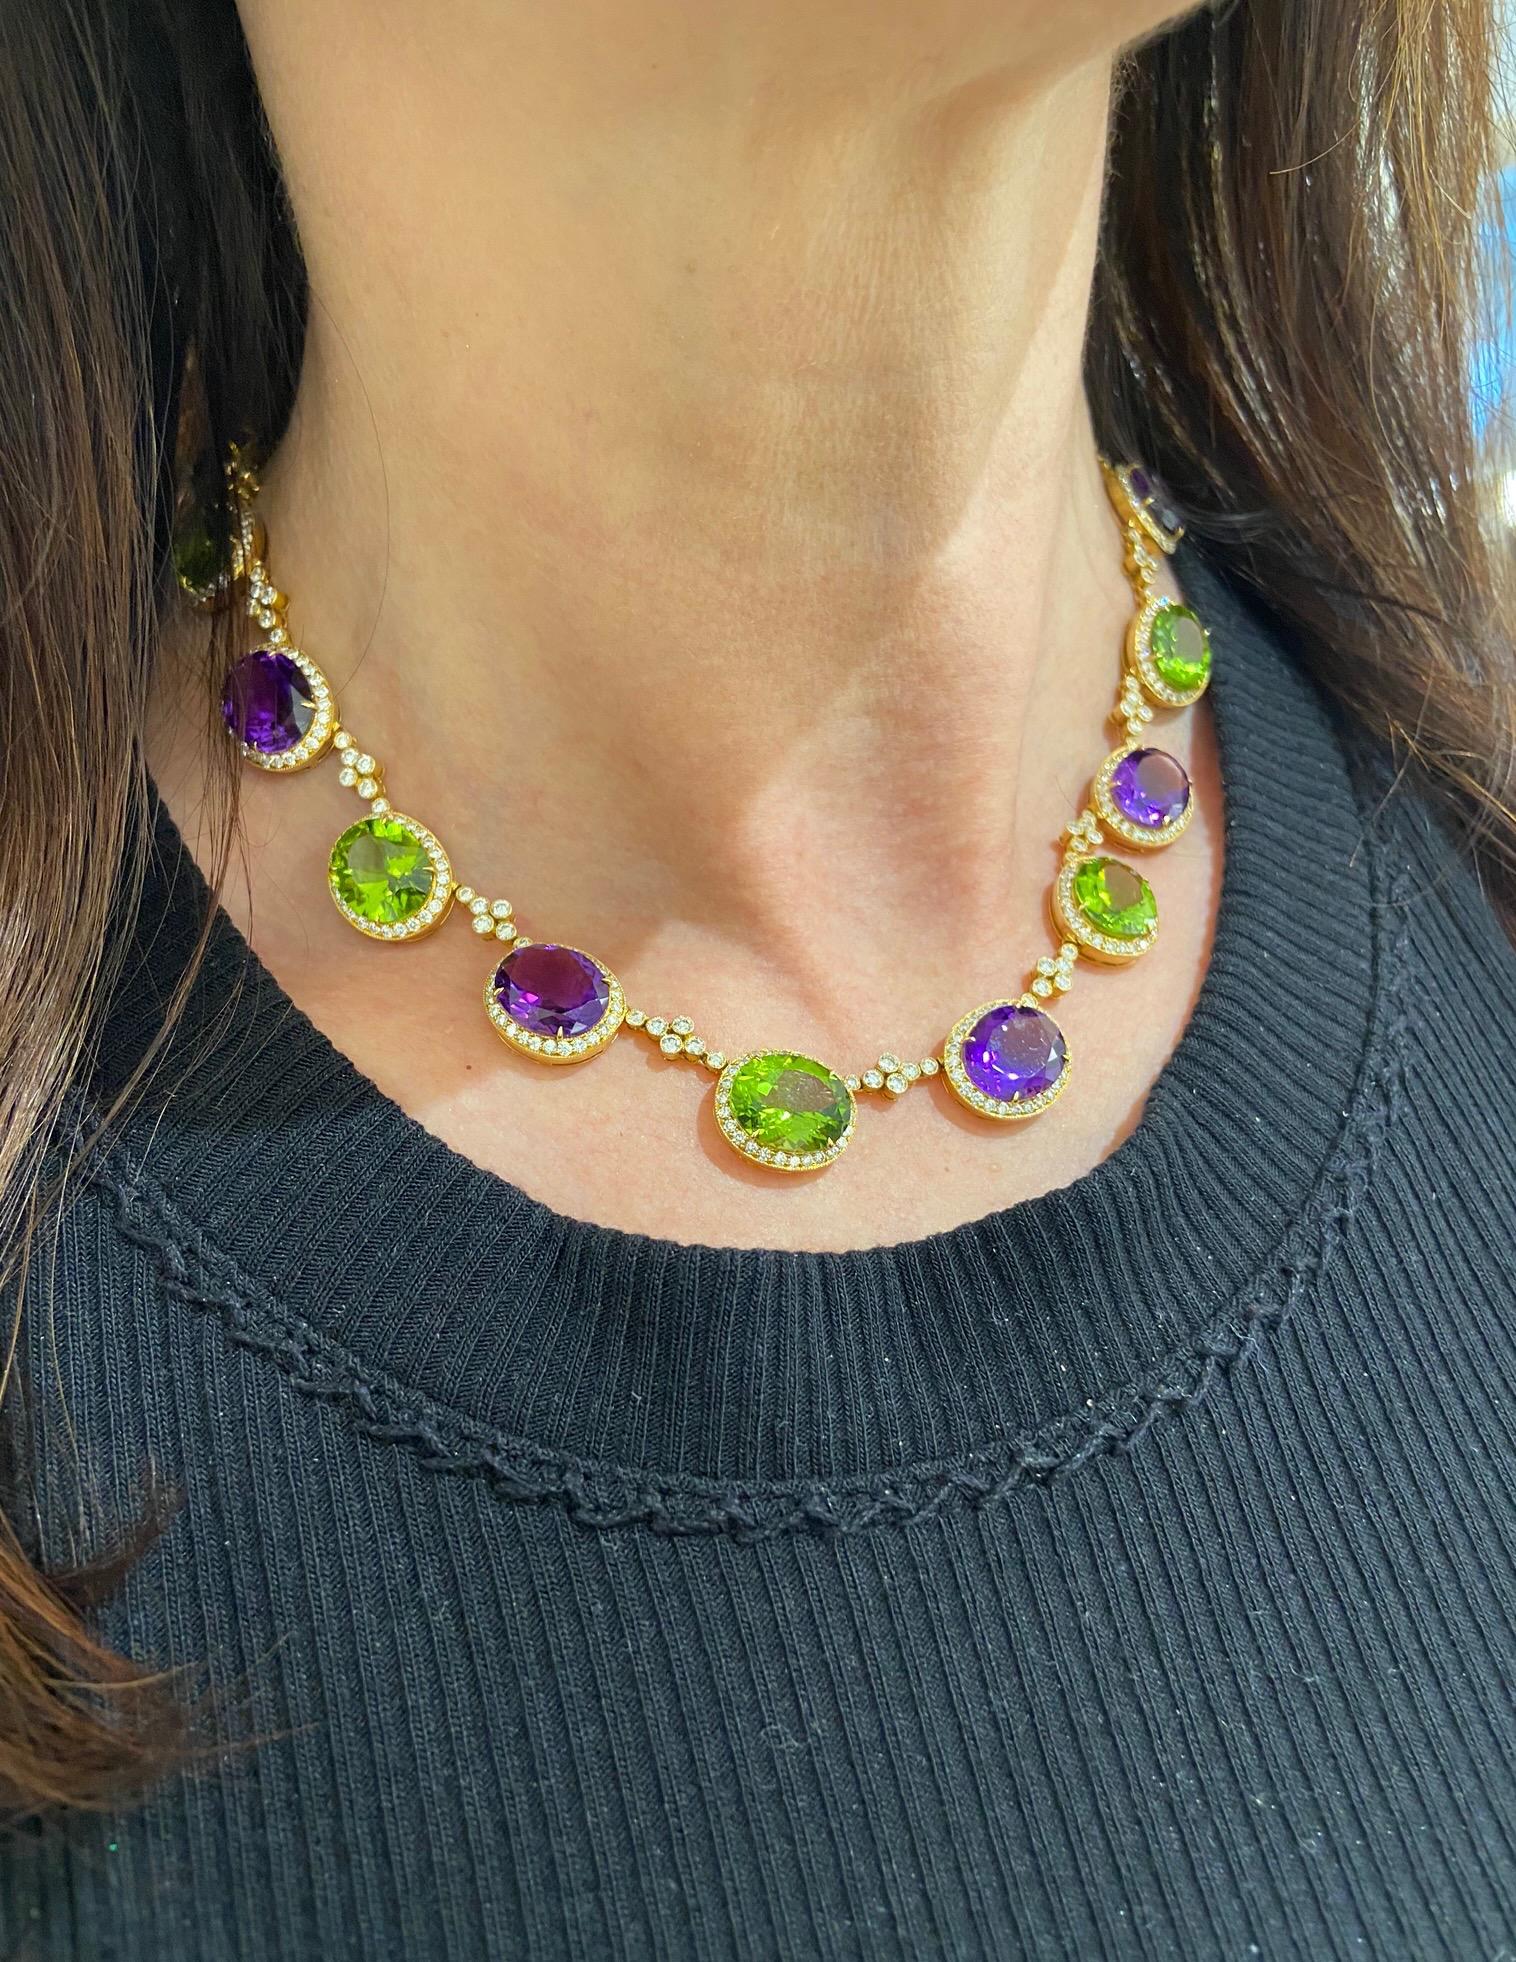 Modern 18KT YG Necklace with Diamond 8.25CT's, Amethyst 32.54Ct., Peridot 37.07Ct. For Sale